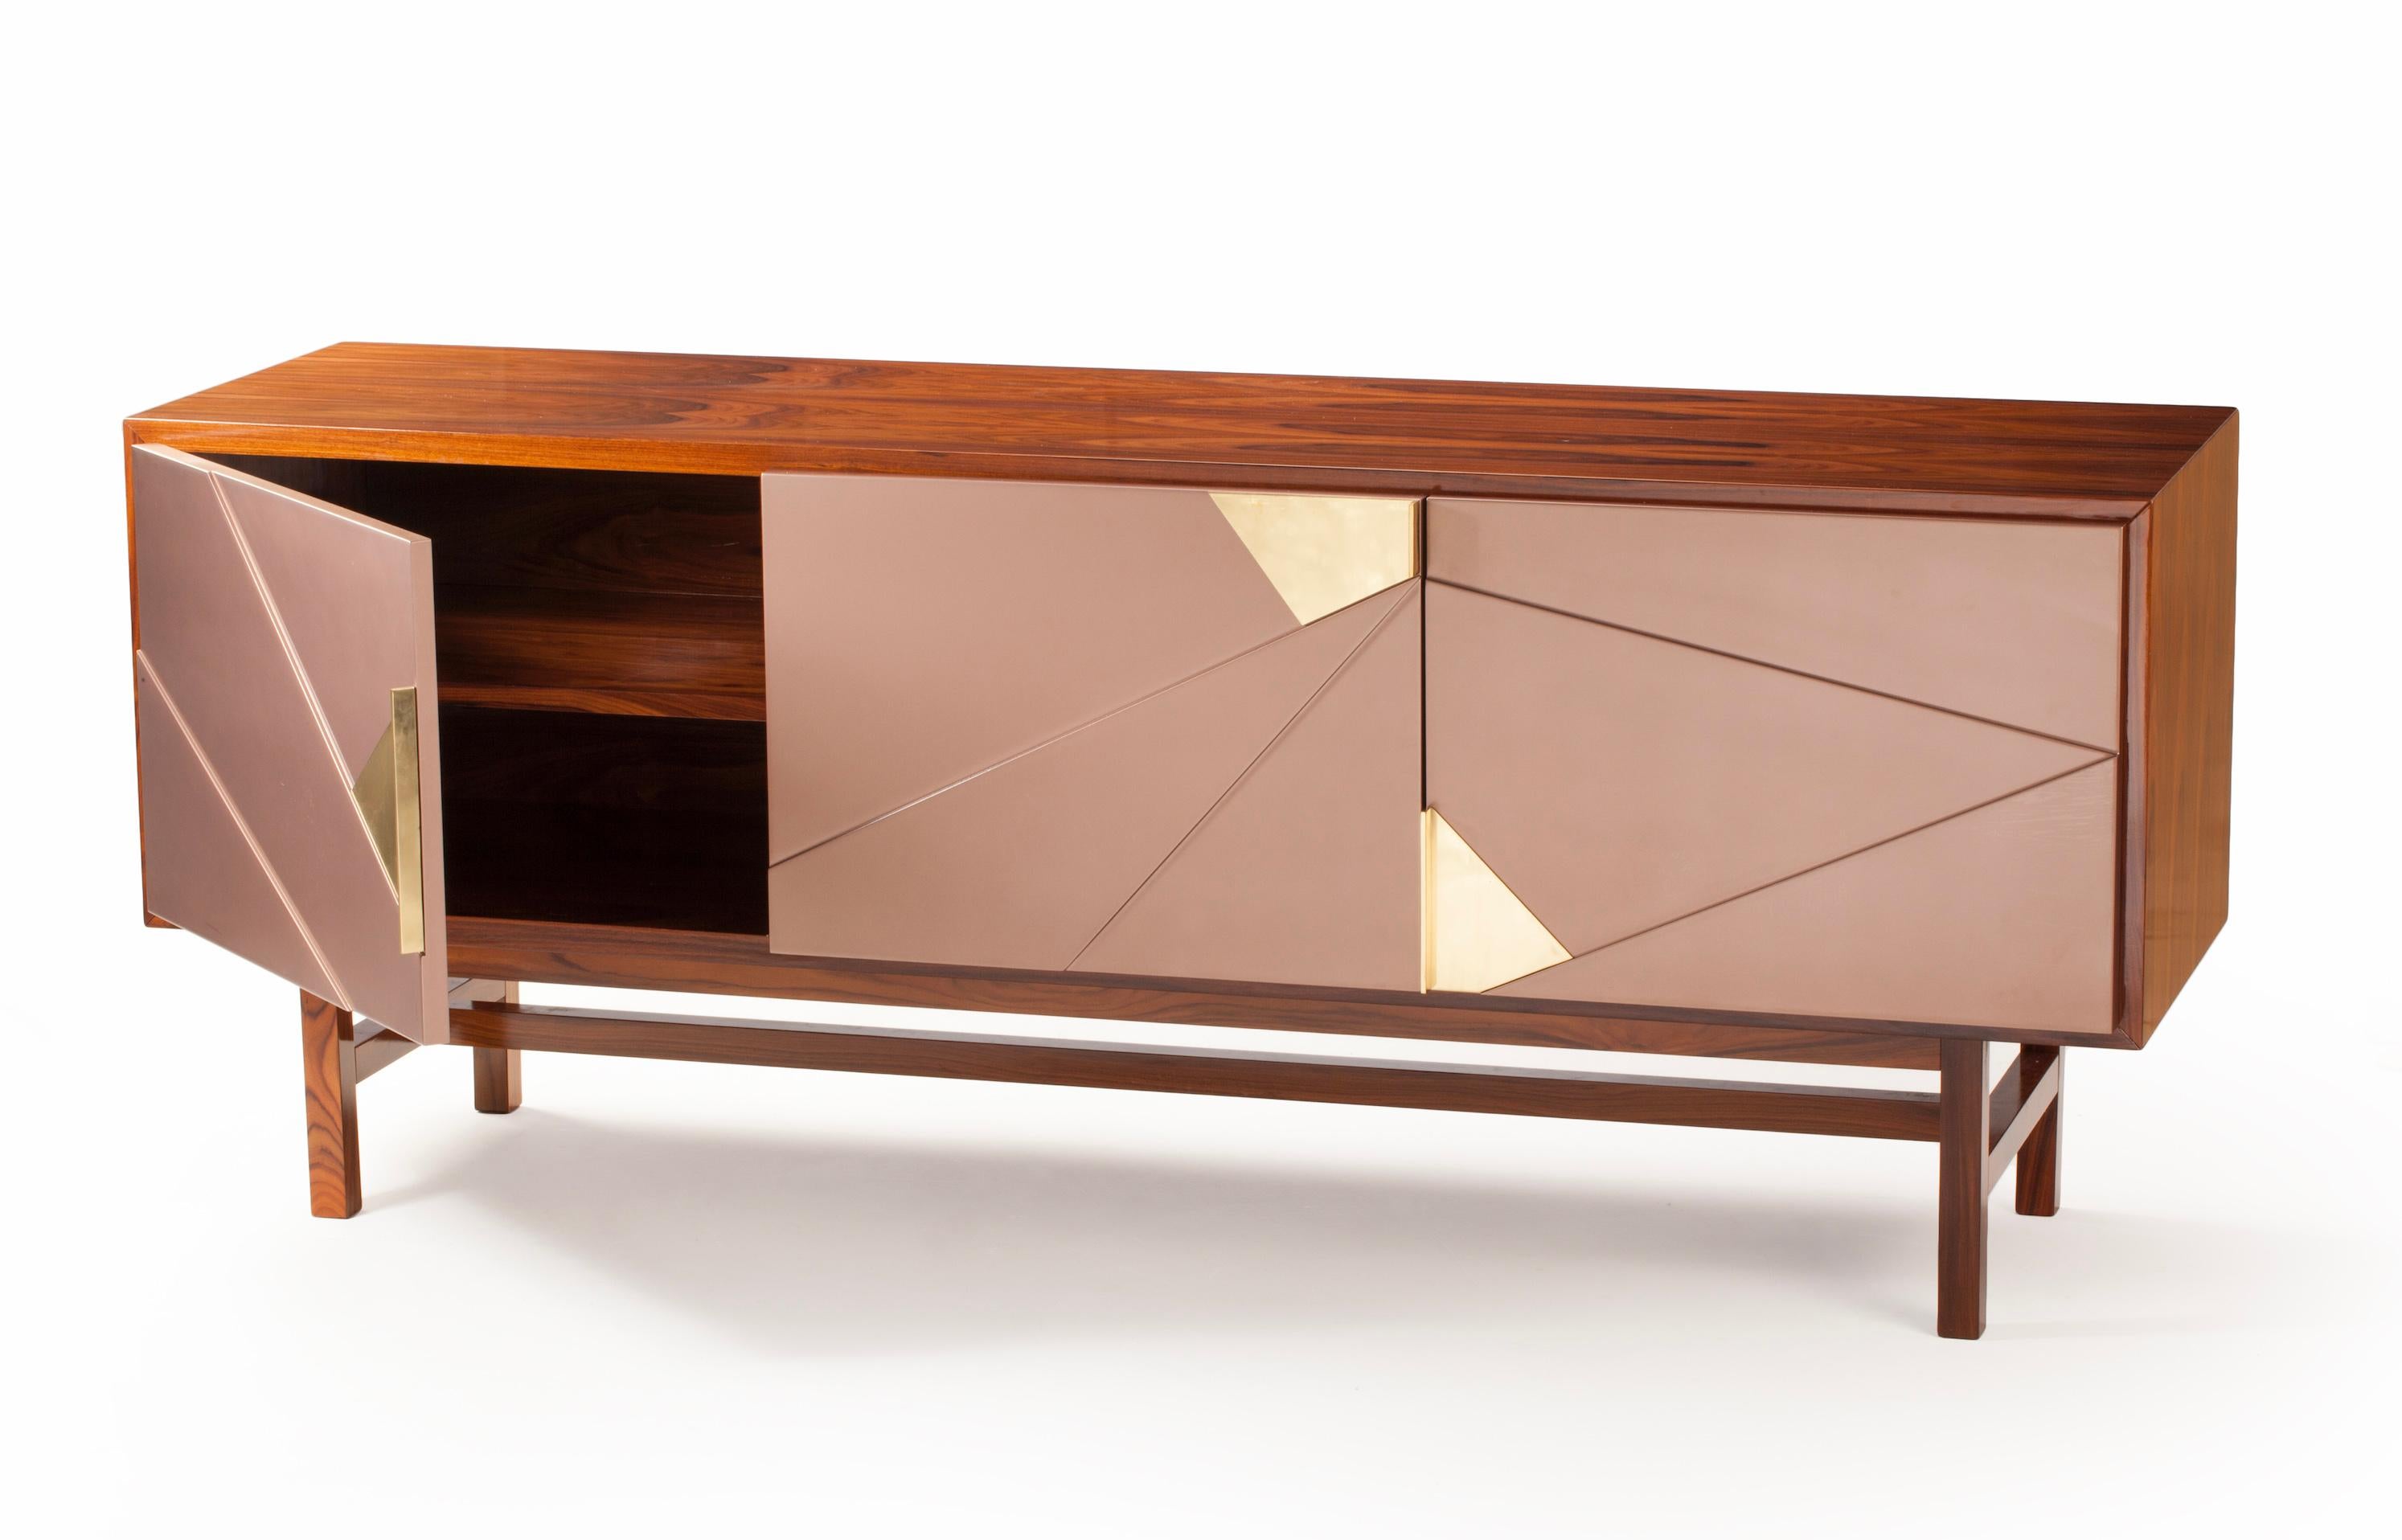 Jazz sideboard is a high quality product by Mambo Unlimited Ideas, crafted in polished or matte walnut wood veneer structure and feet, brass applications and lacquered doors. It features three dimensional designs on its doors, elegant oxidized brass